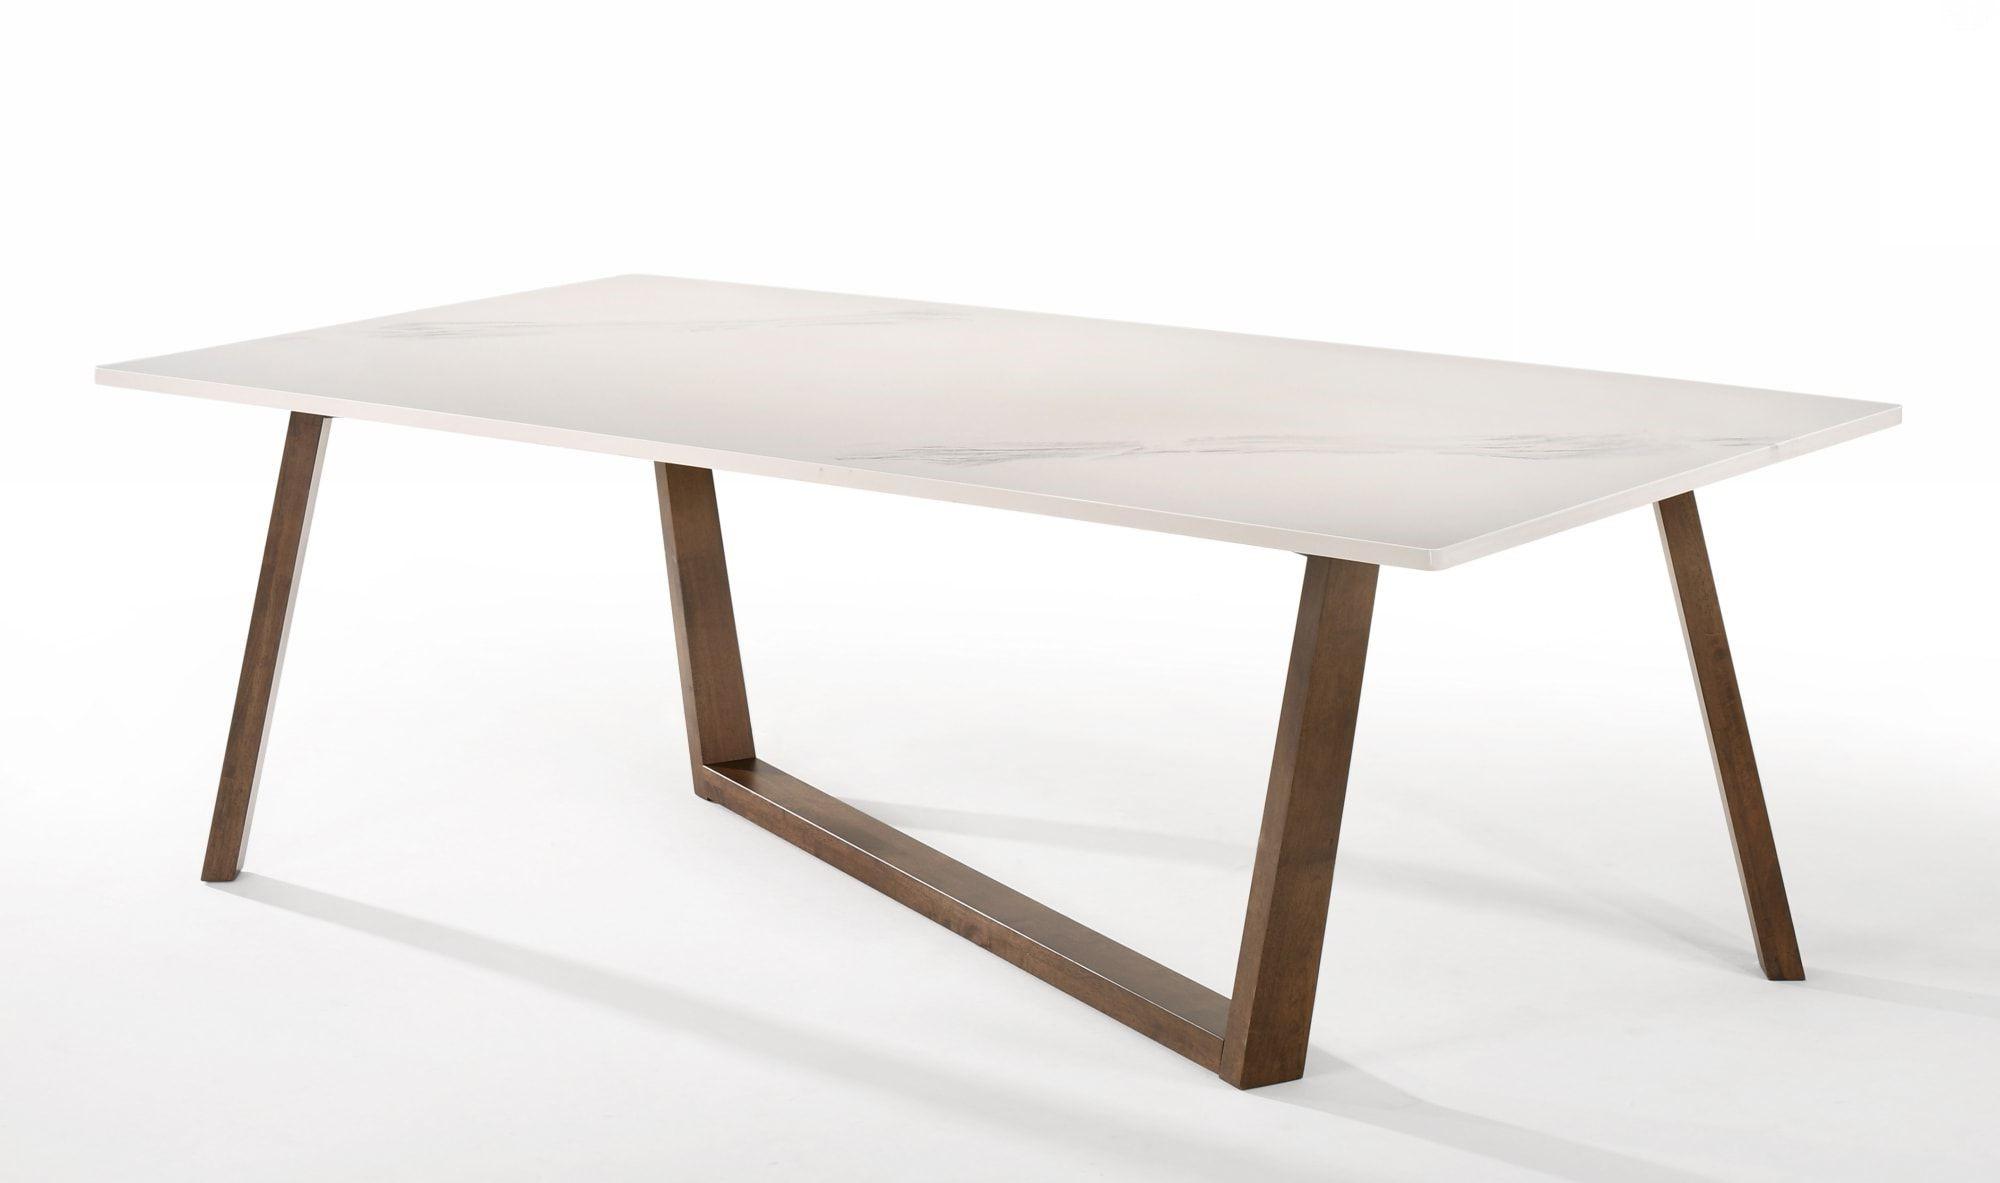 Contemporary, Modern Dining Table Jozy VGMA-MIT-1163 in Walnut, White 